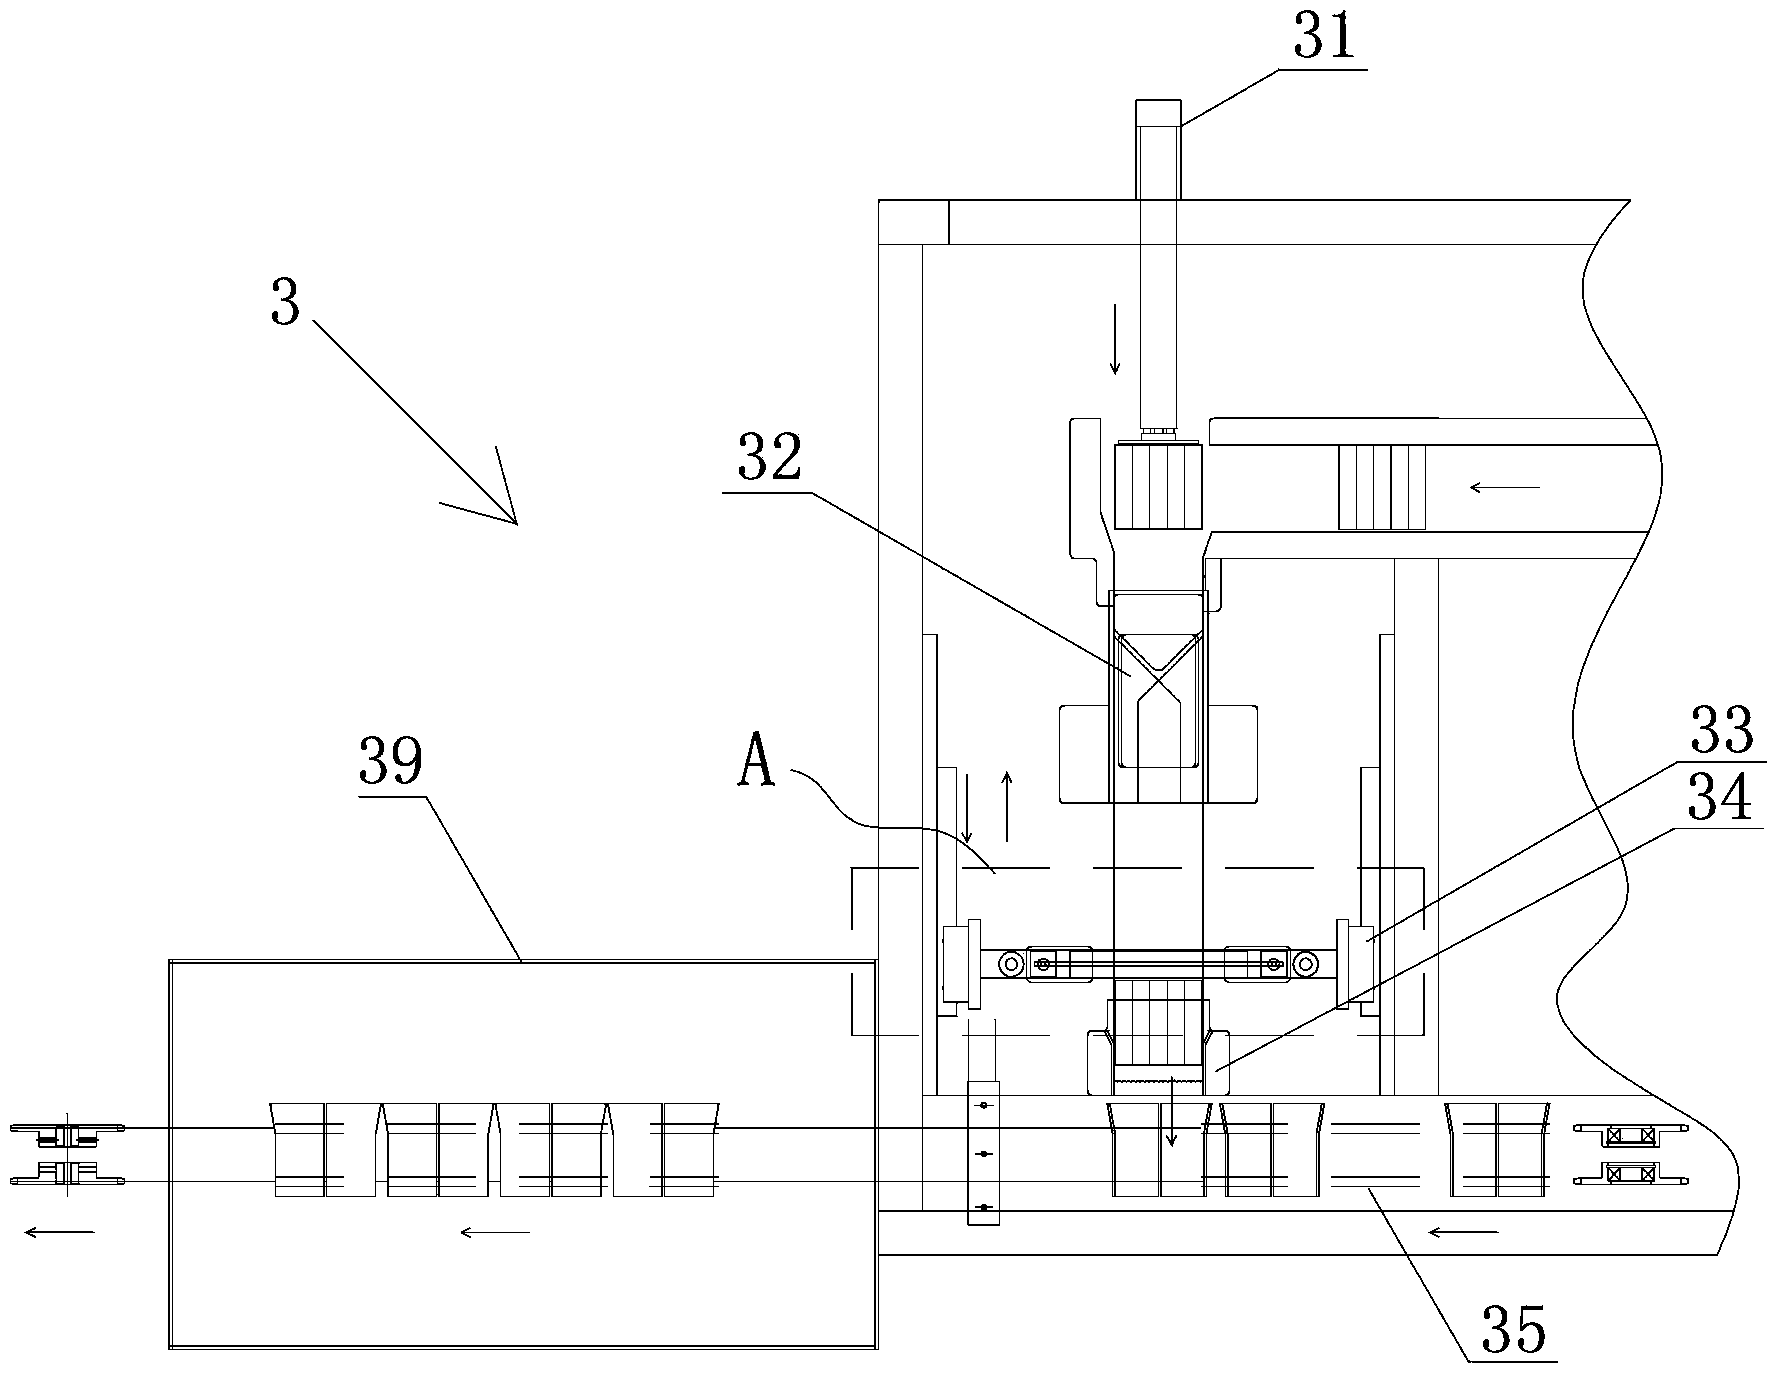 Method and device for automatically arranging, stacking and plastically packaging coin rolls